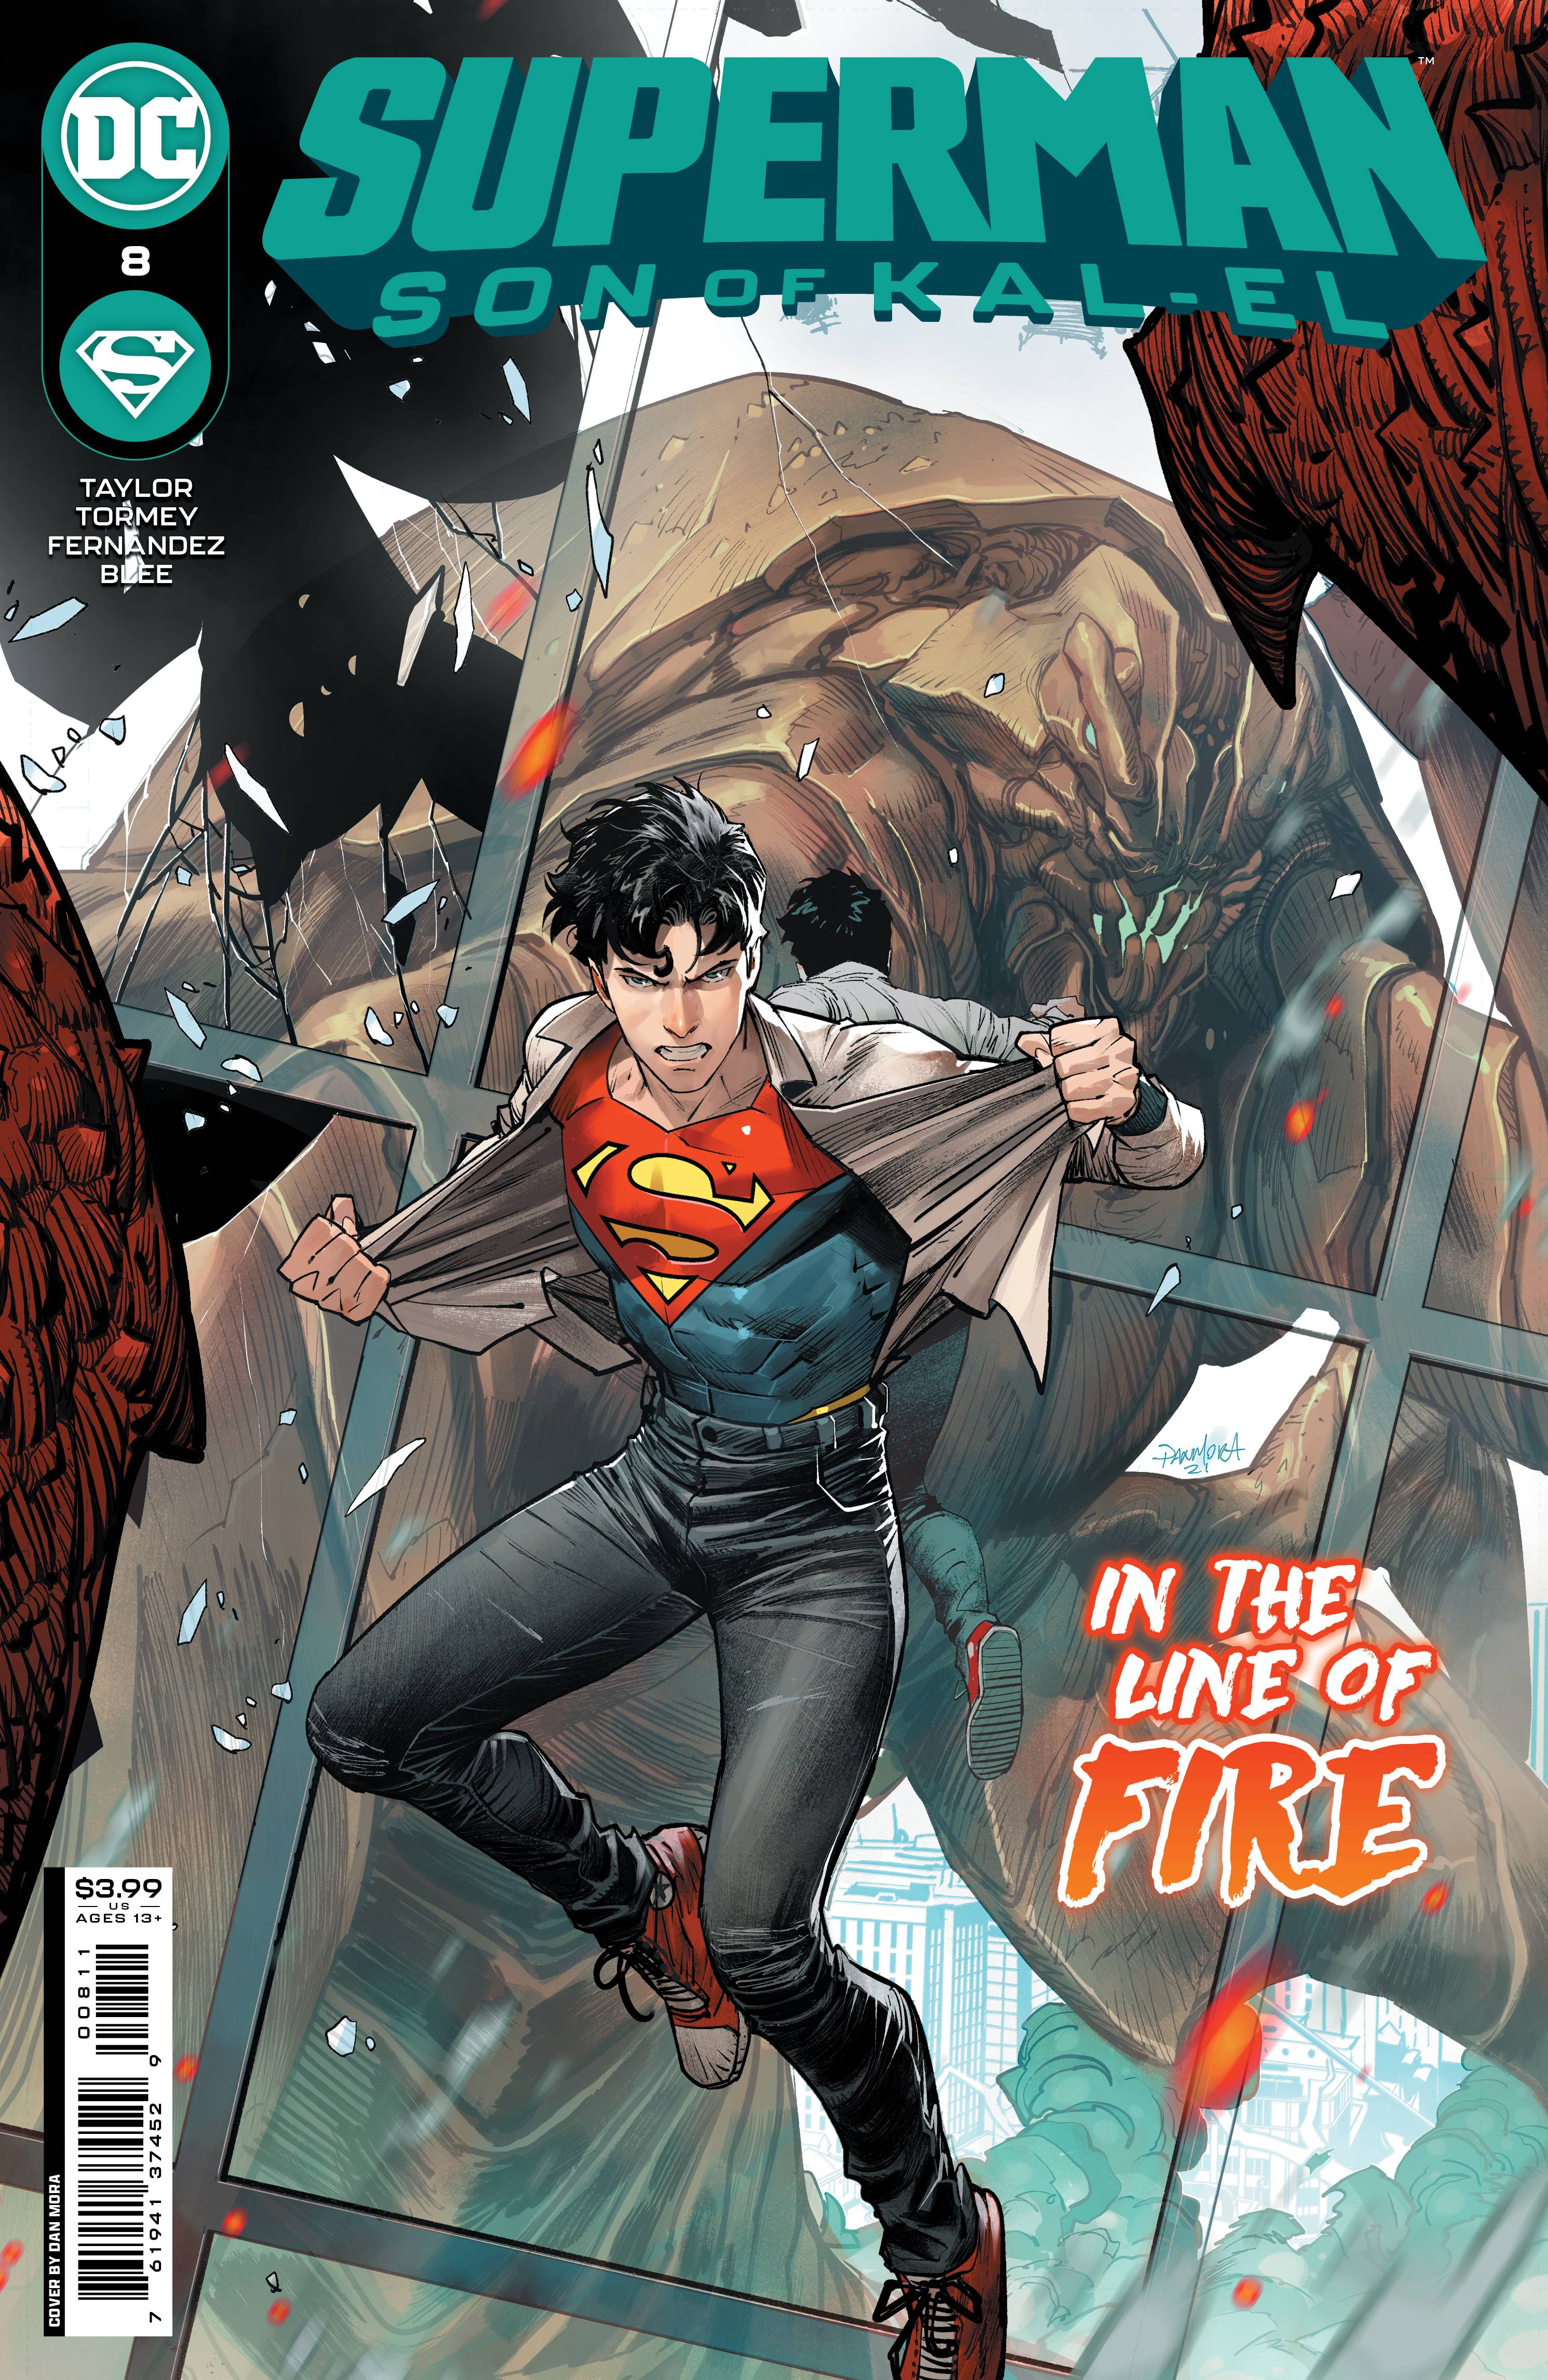 SUPERMAN SON OF KAL EL #8 CVR A MOORE | Game Master's Emporium (The New GME)